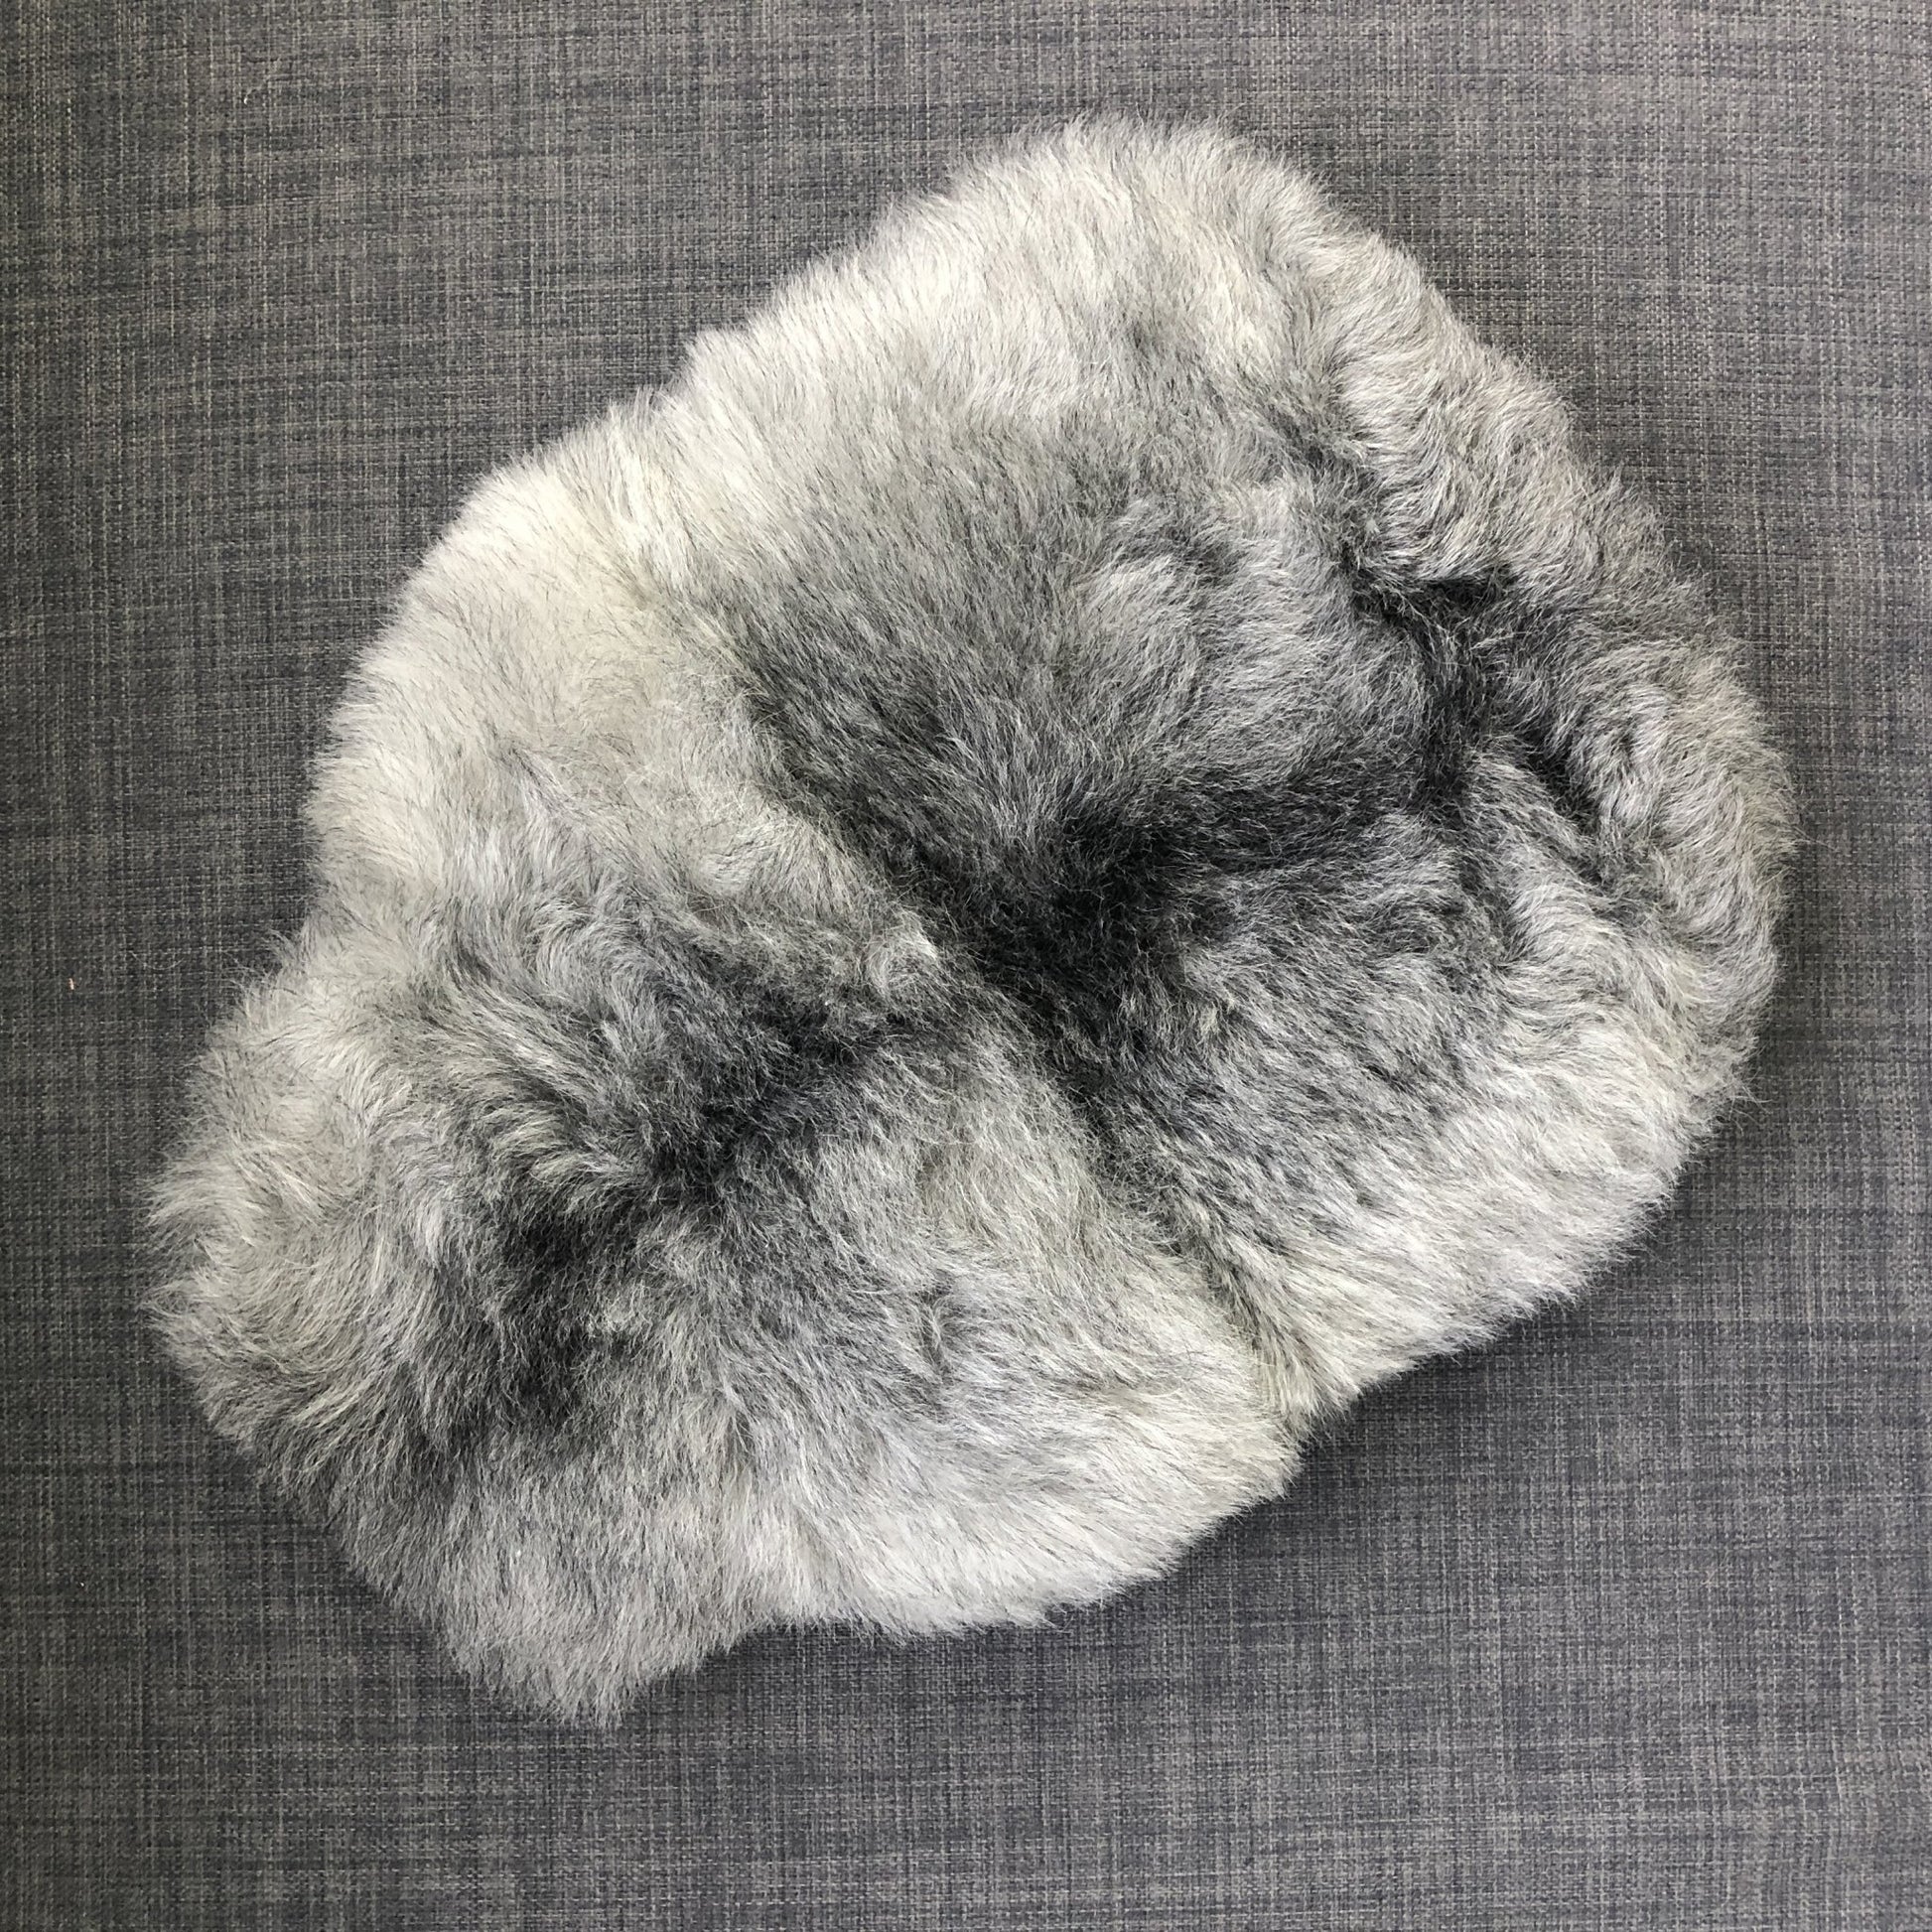 Luxurious Genuine Icelandic Sheepskin Hot Water Bottle Cover 'hottie' Heat  Pad White/ivory, Grey, Baby Pink, Taupe, Brown Fur on Both Sides 